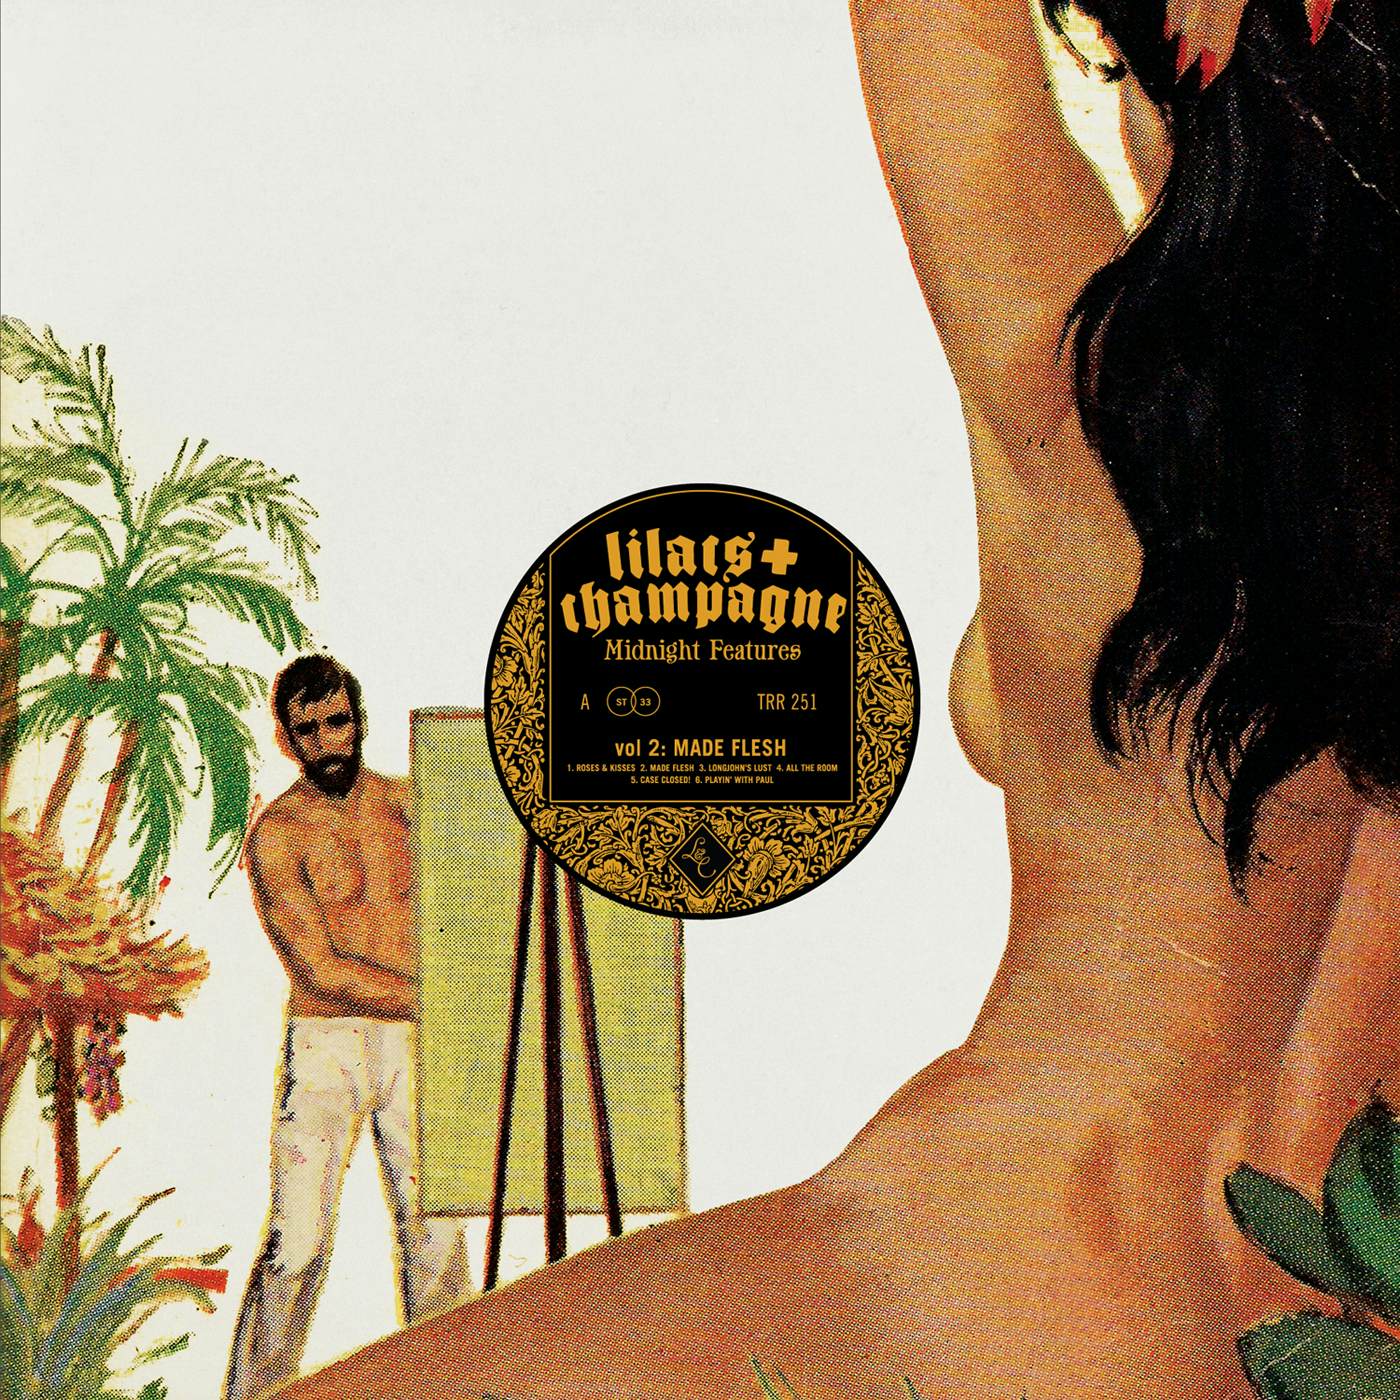 Lilacs & Champagne MIDNIGHT FEATURES 2: MADE FLESH Vinyl Record